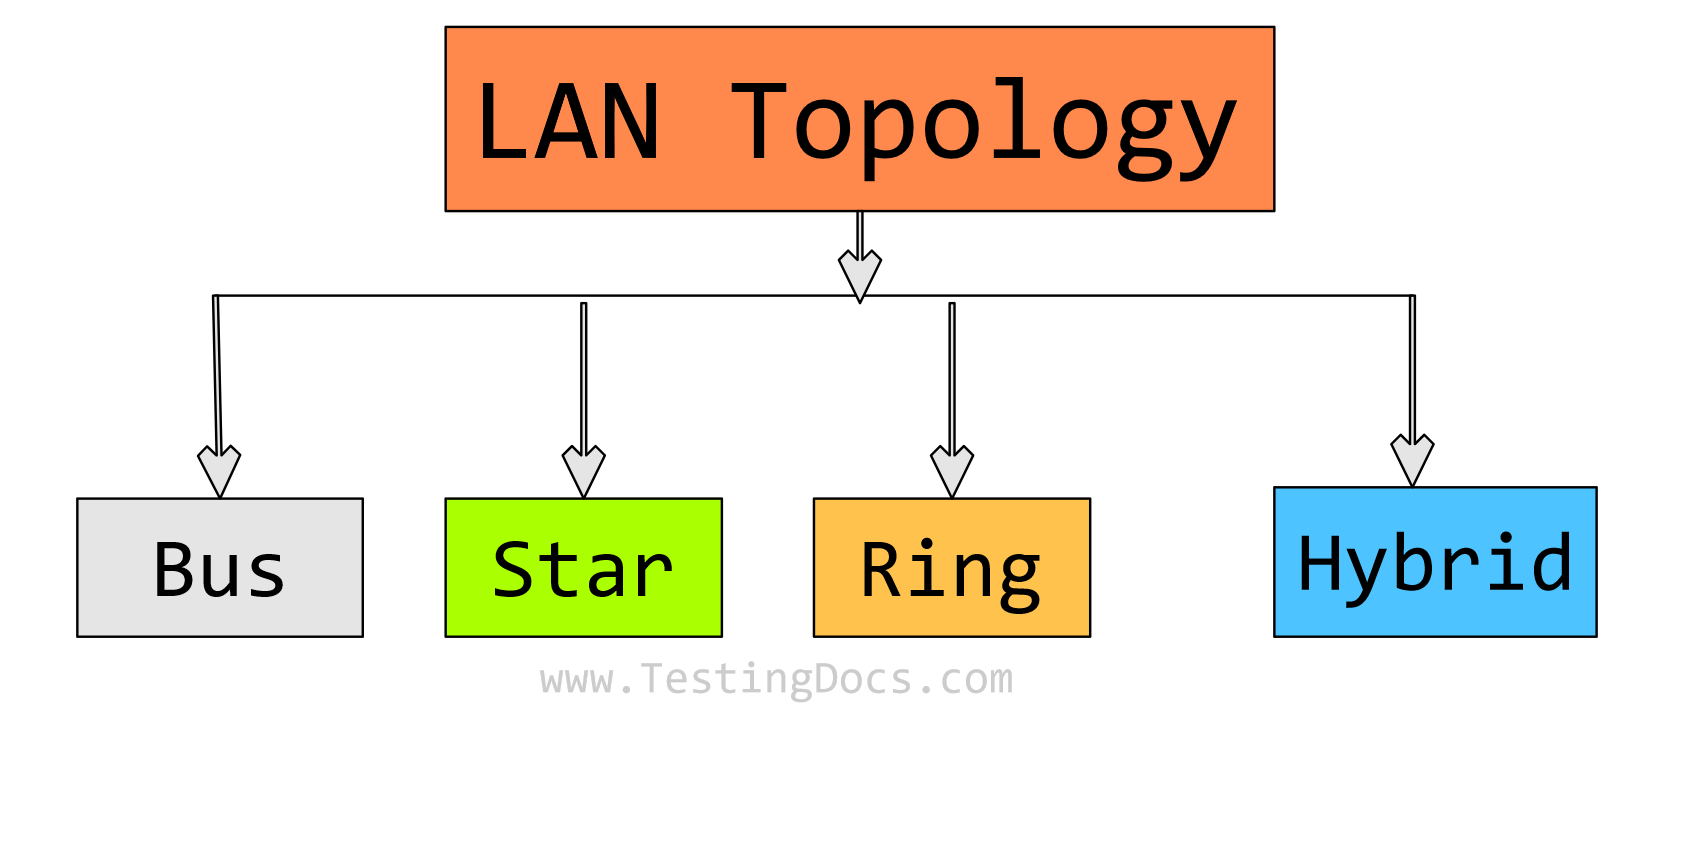 Advantages and Disadvantages of ring topology - GeeksforGeeks